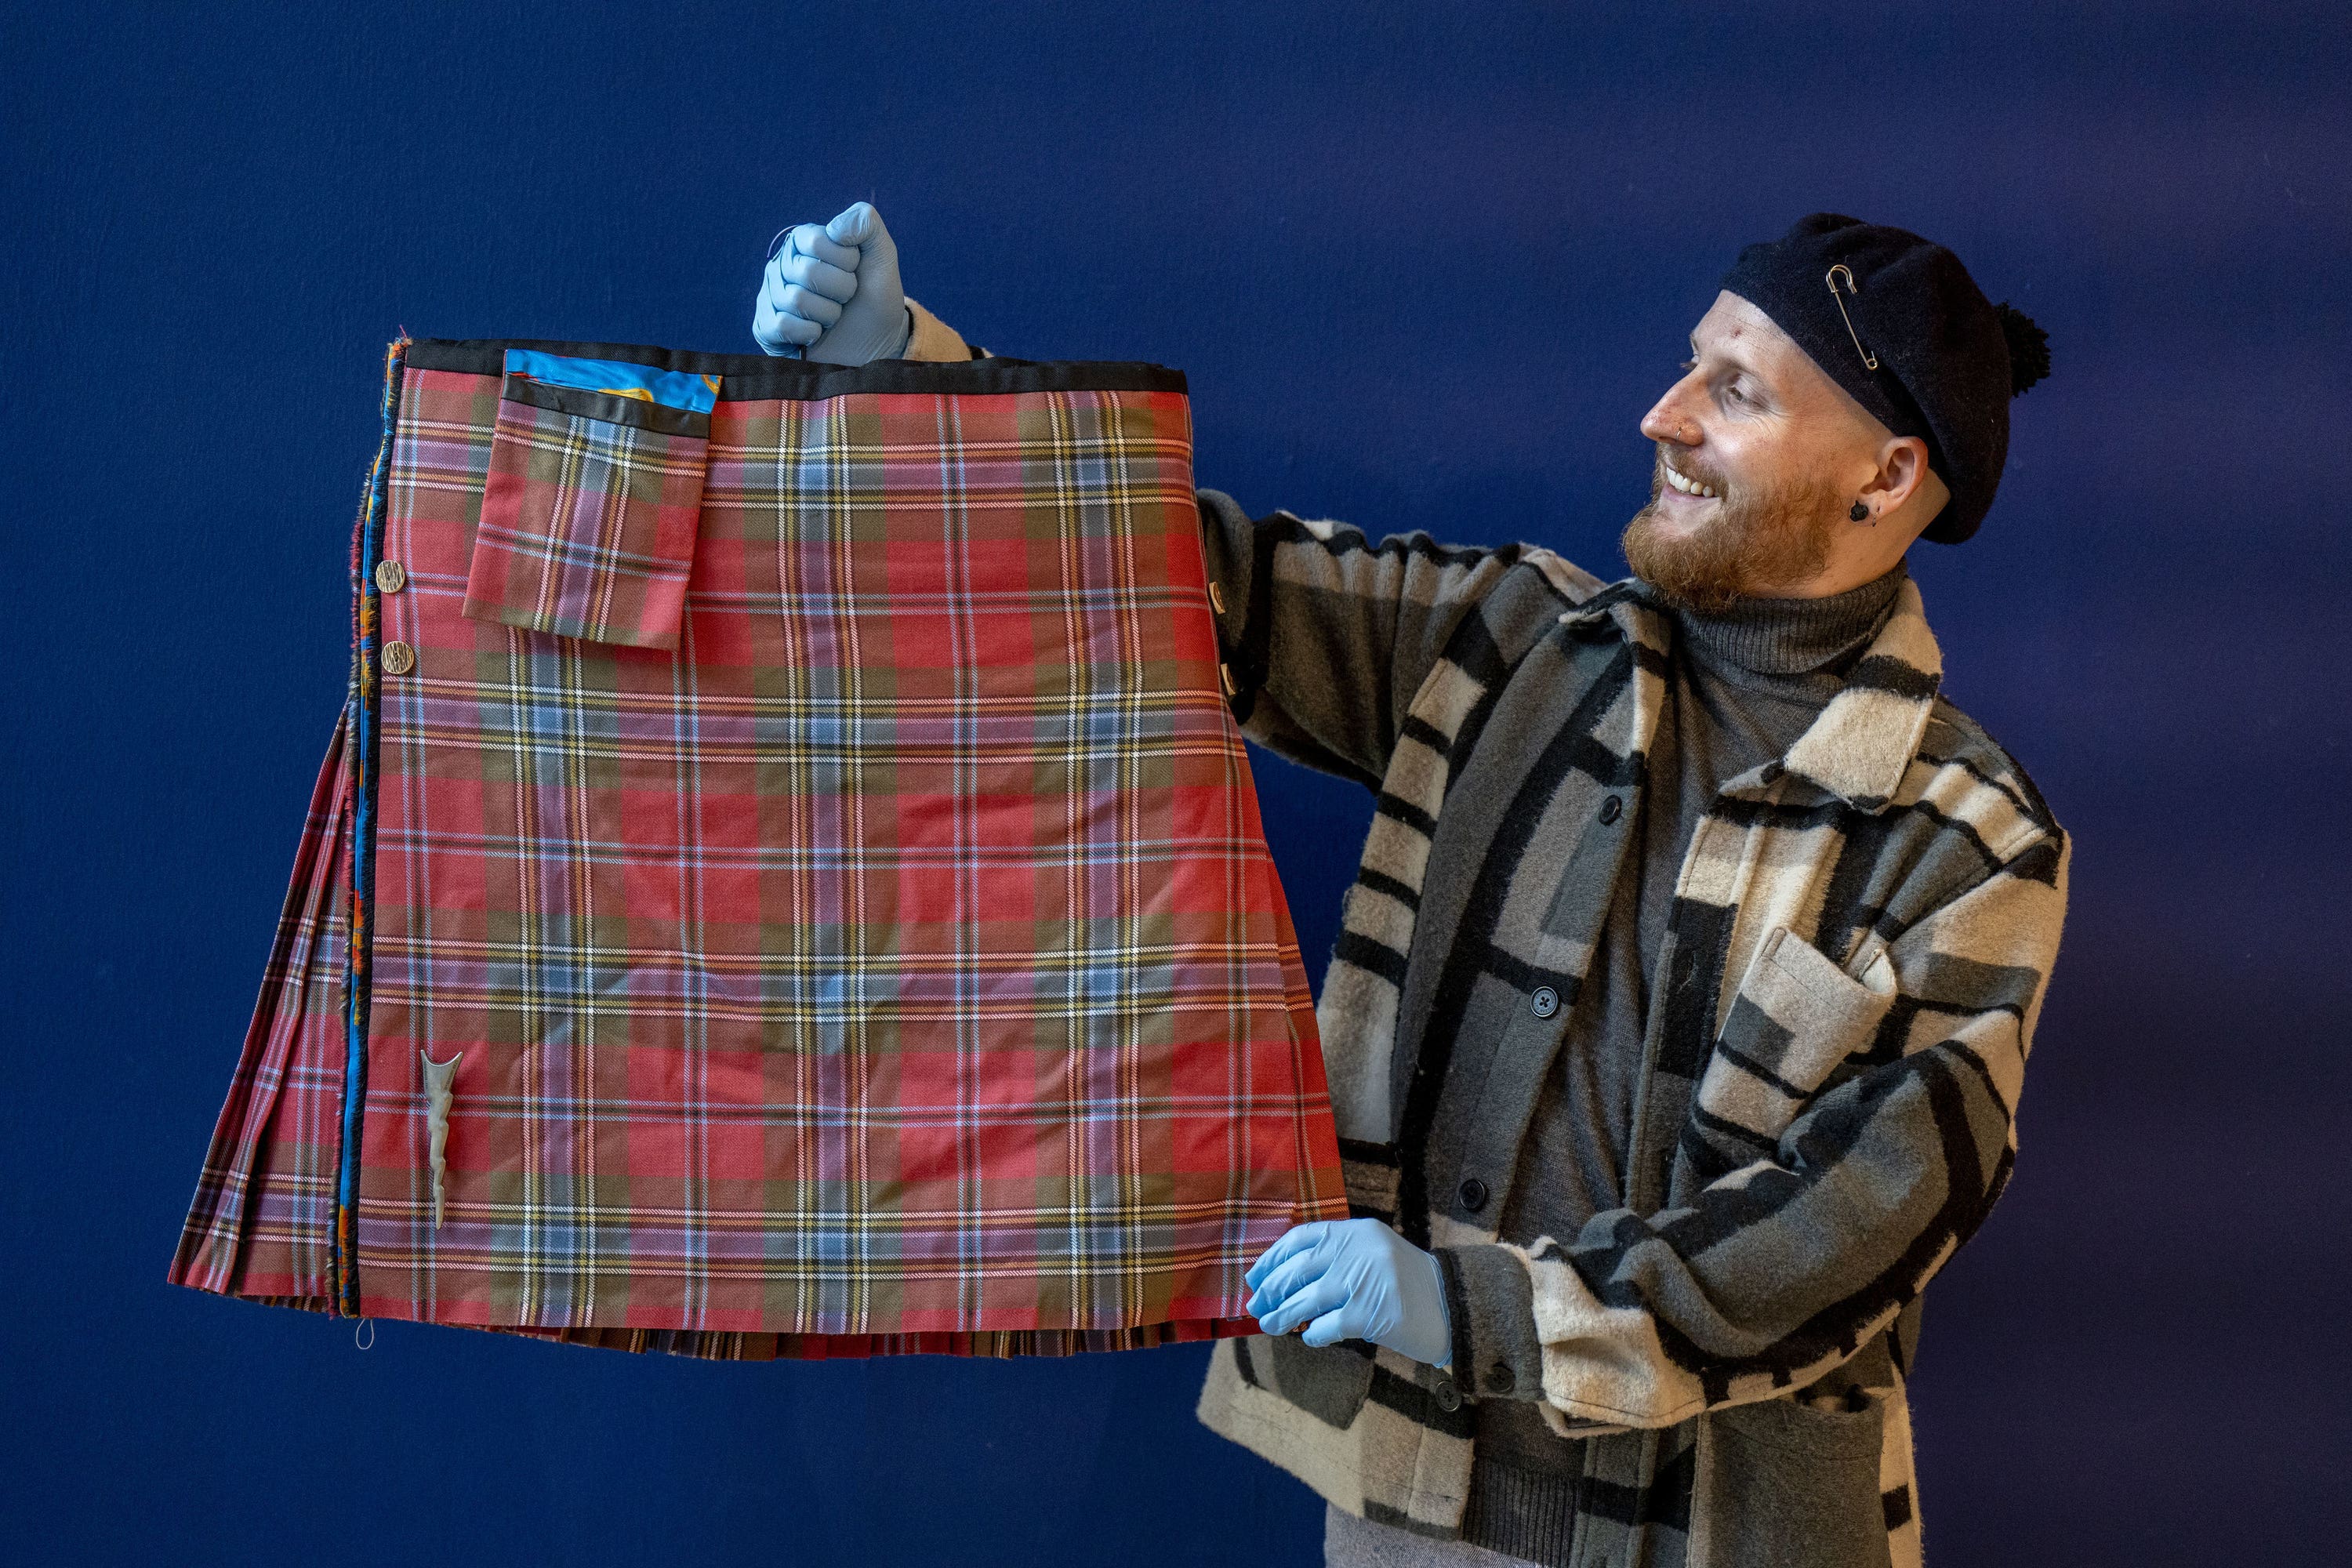 The kilt will become part of the People’s Tartan collection at the V&A Dundee.